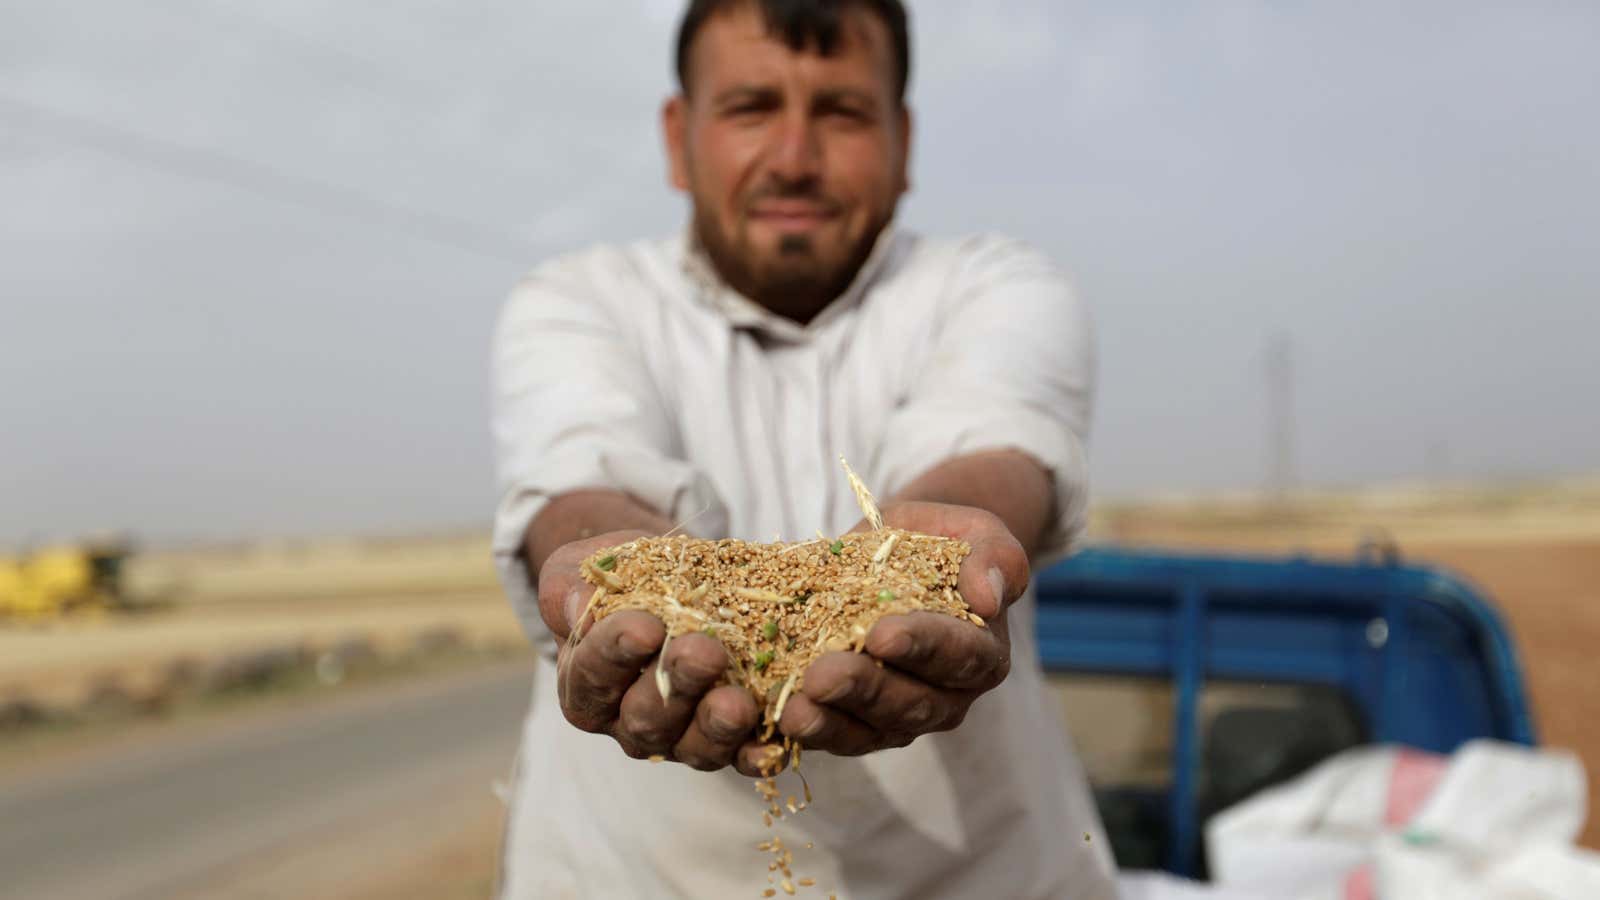 A farmer shows wheat grains in his hands in southern Idlib countryside, Syria.